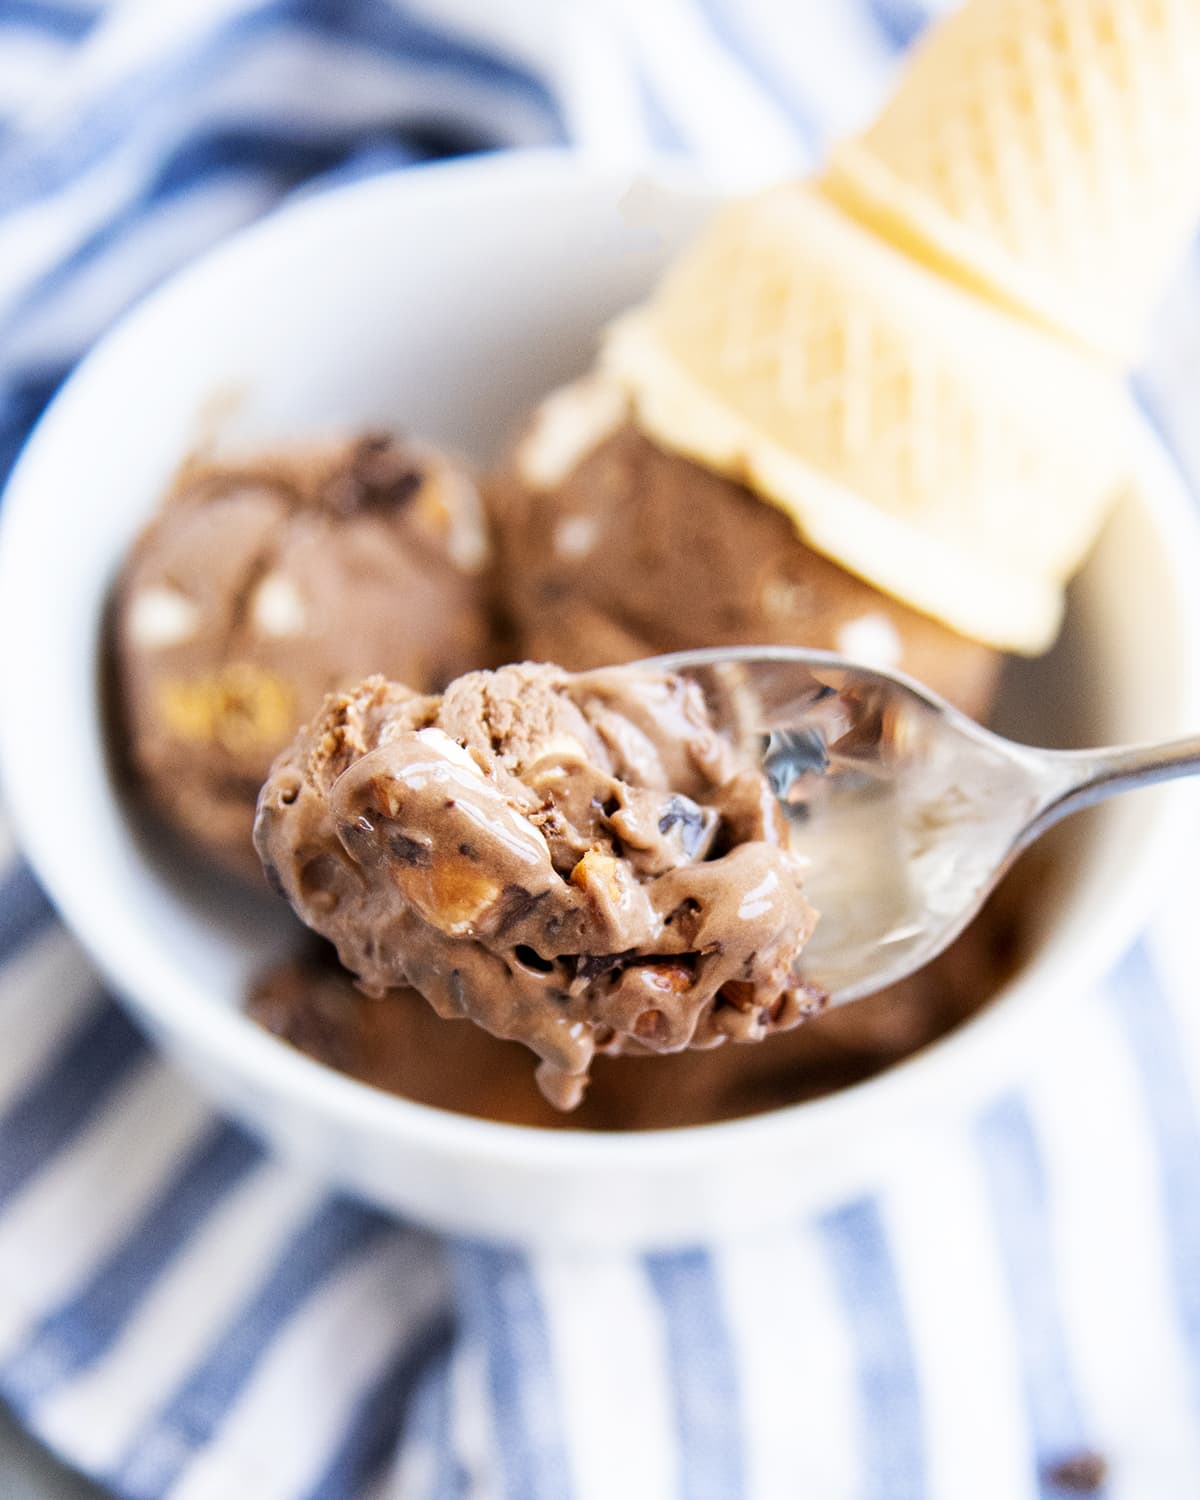 A spoonful of rocky road chocolate ice cream above a bowl of it.